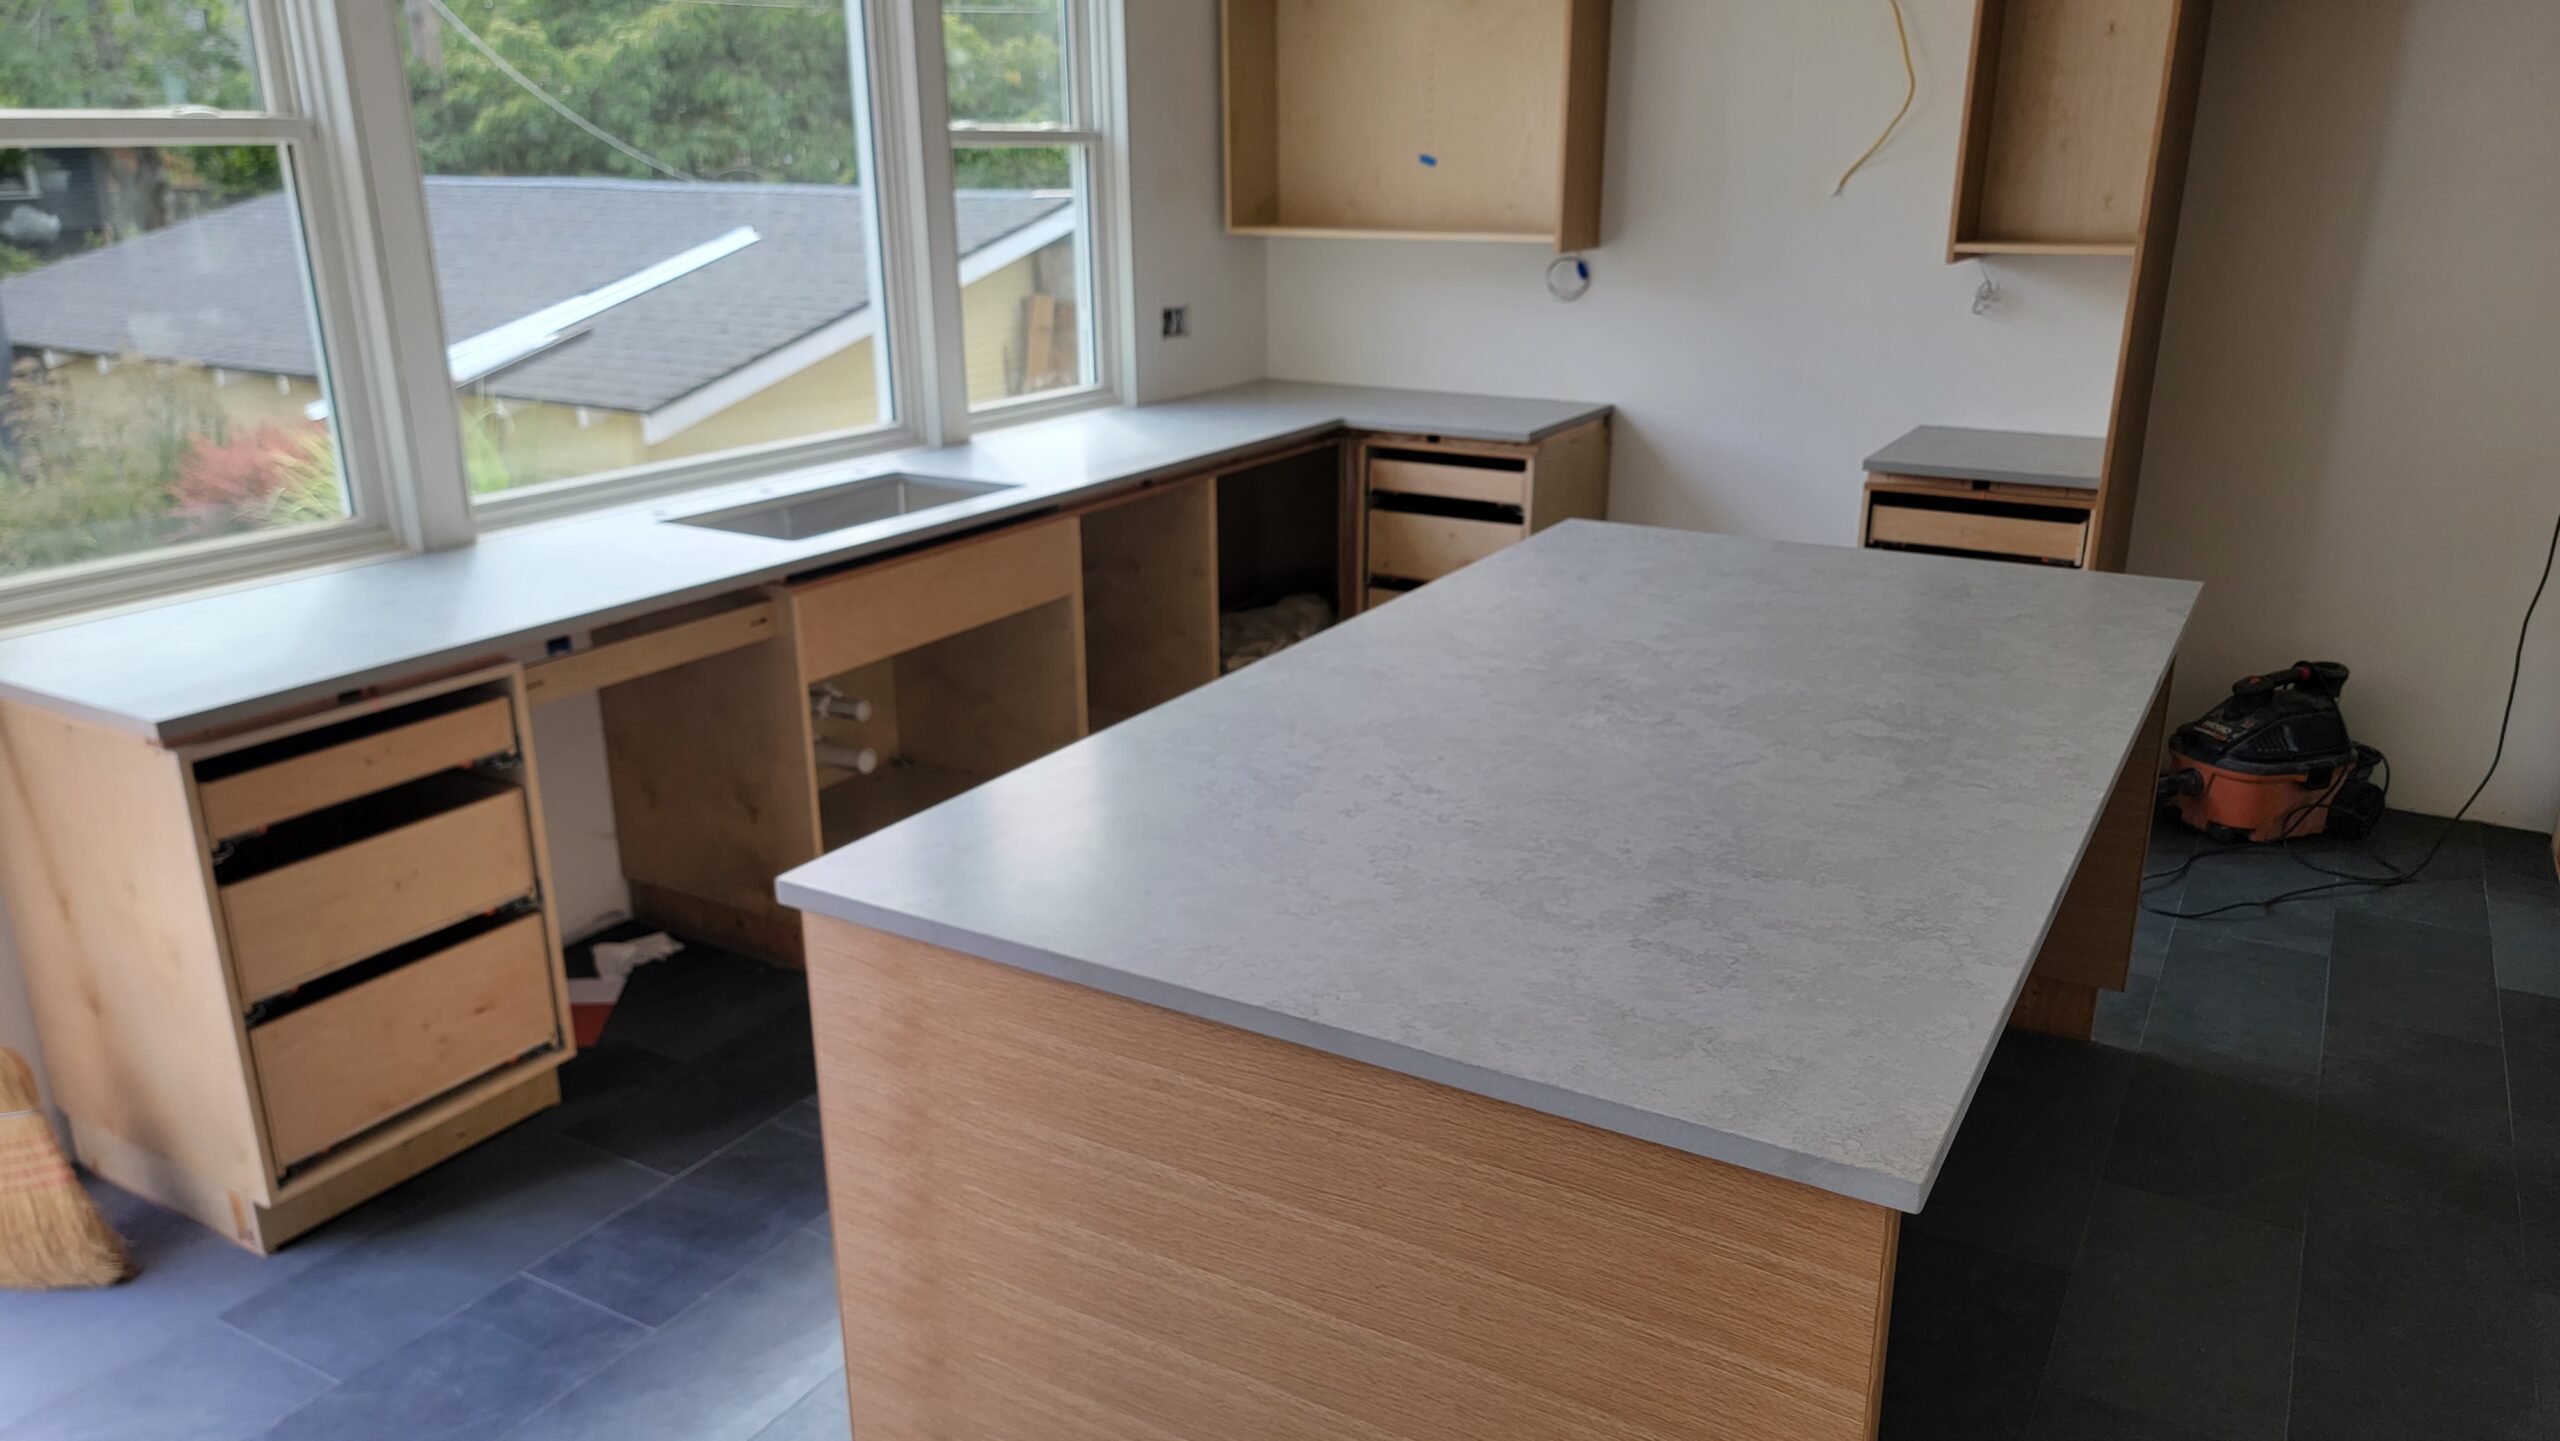 Light grey honed quartz countertops installed by Crowley's